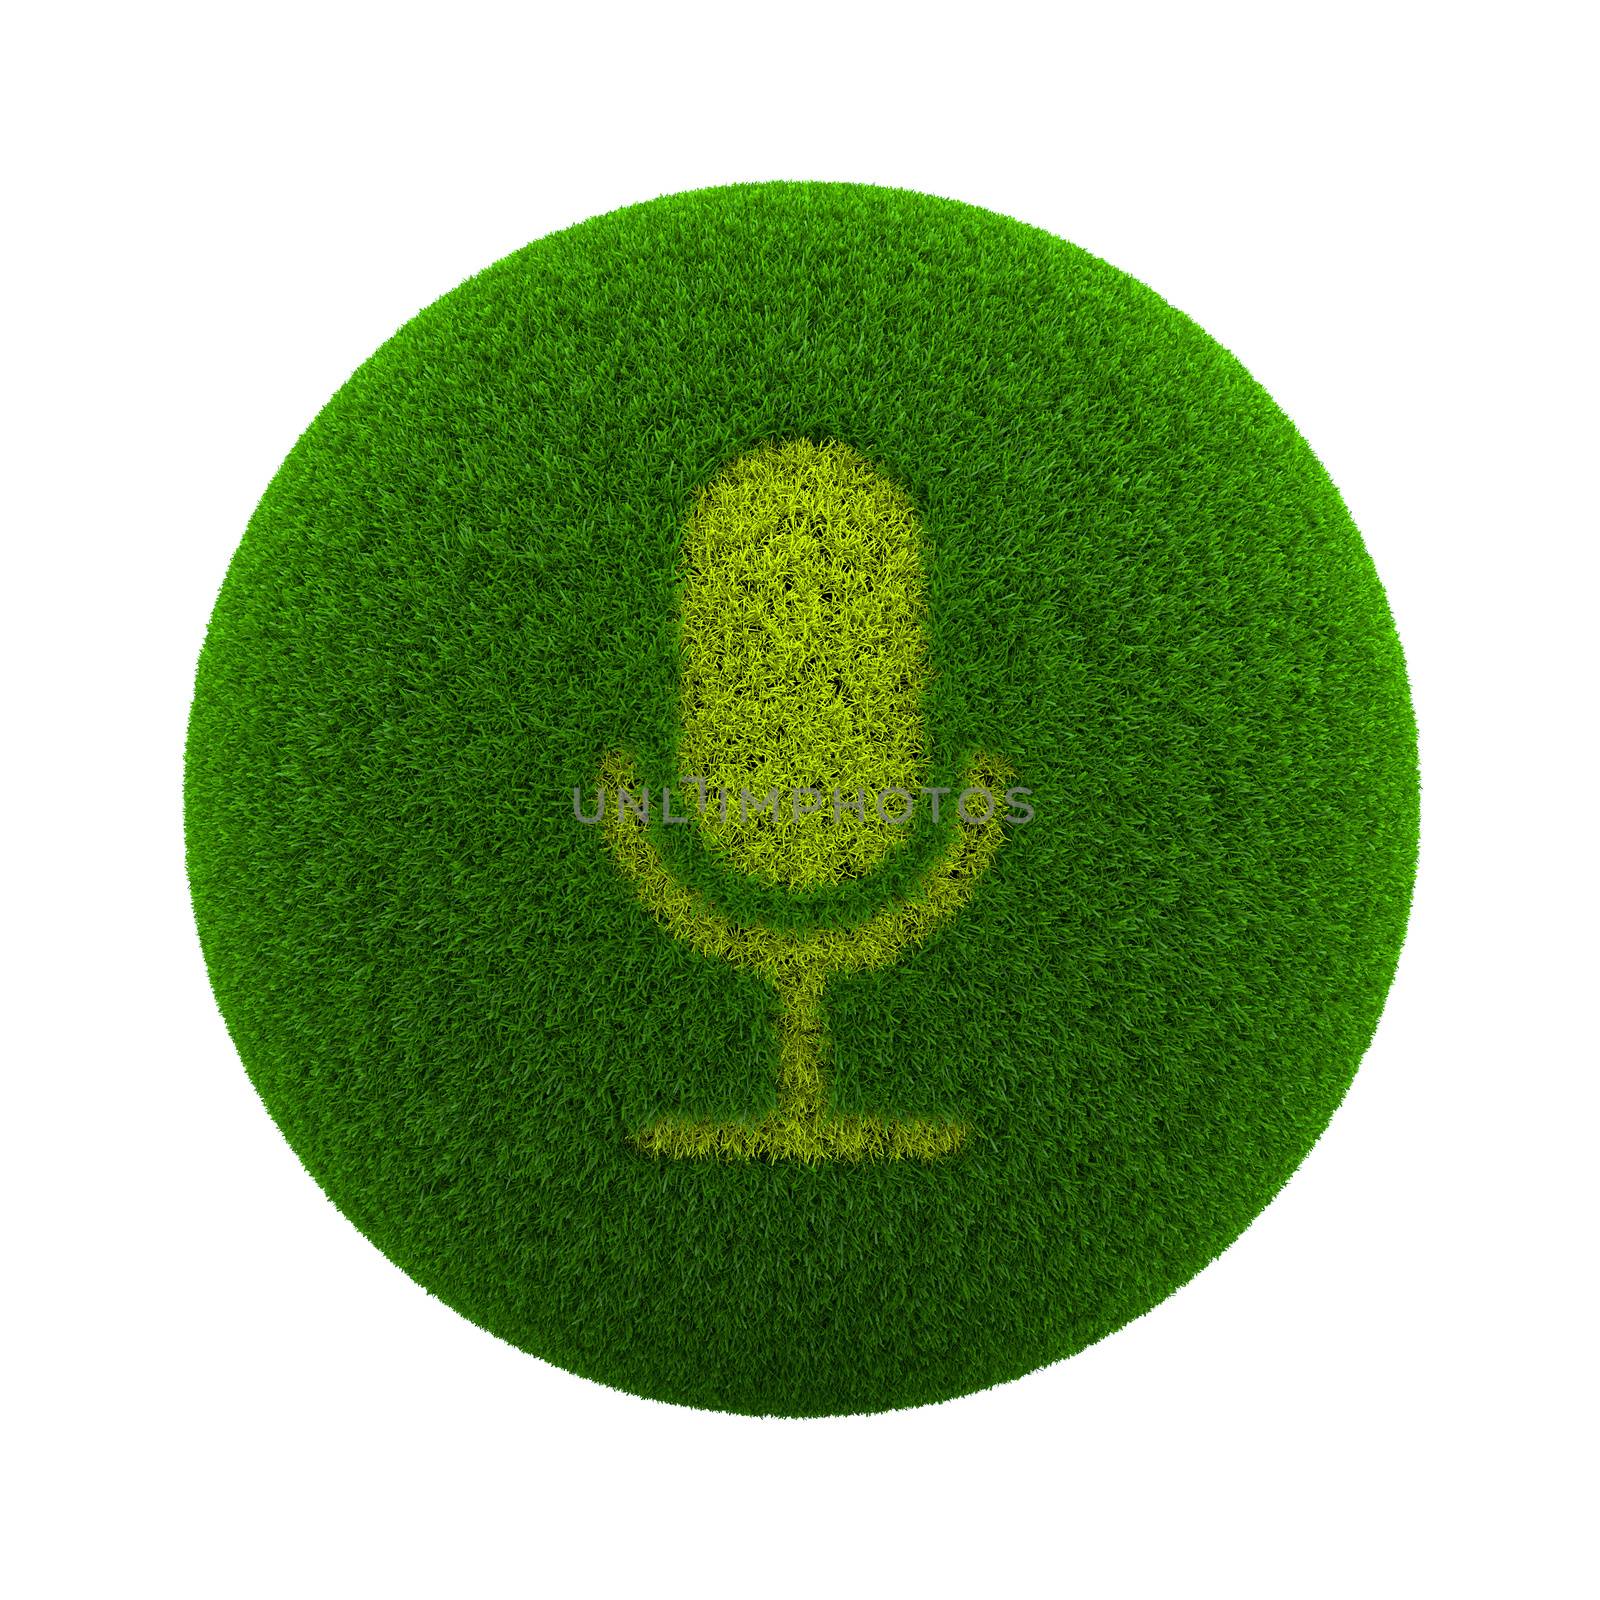 Green Globe with Grass Cutted in the Shape of a Microphone Symbol 3D Illustration Isolated on White Background